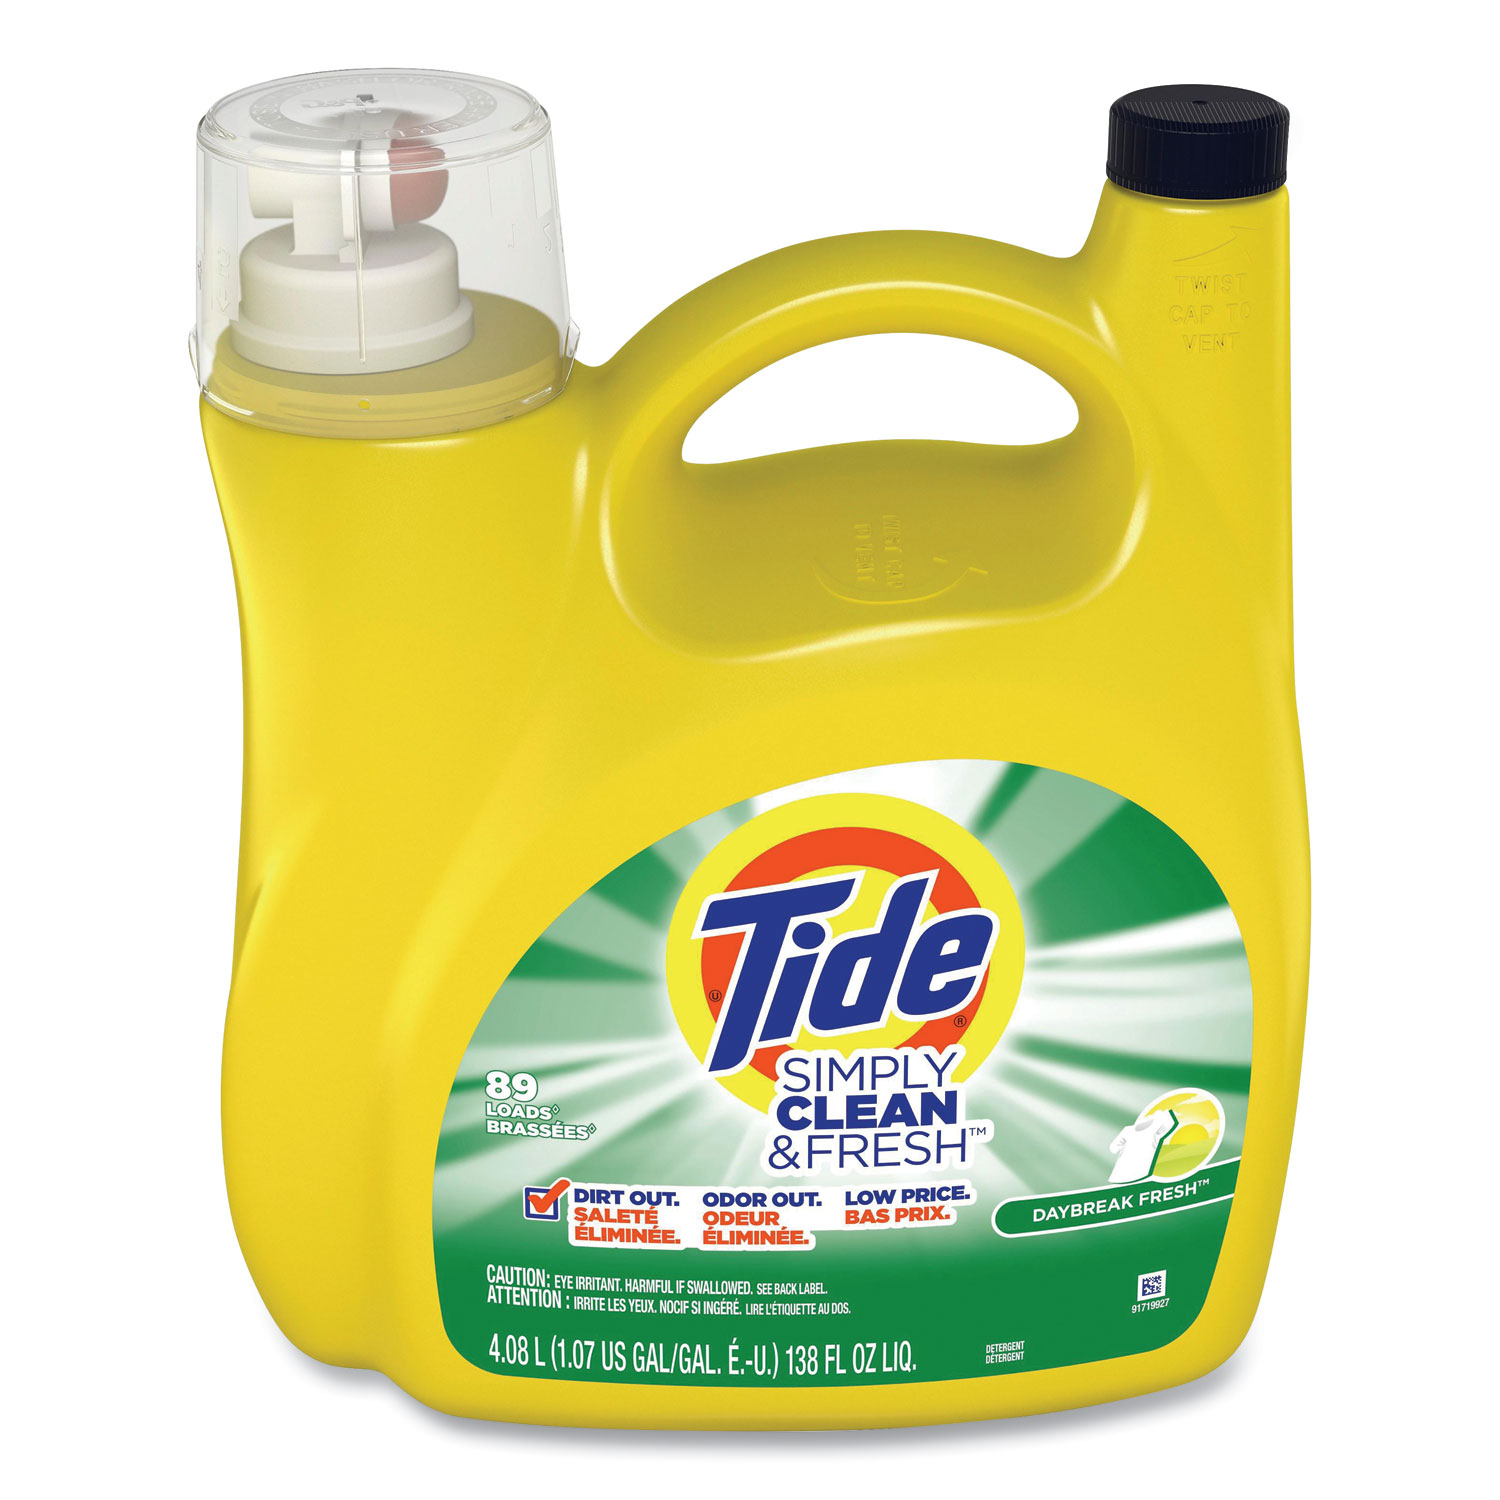  Tide 89130/44800 Simply Clean and Fresh Laundry Detergent, Daybreak Fresh, 138 oz Bottle (PGC2067132) 